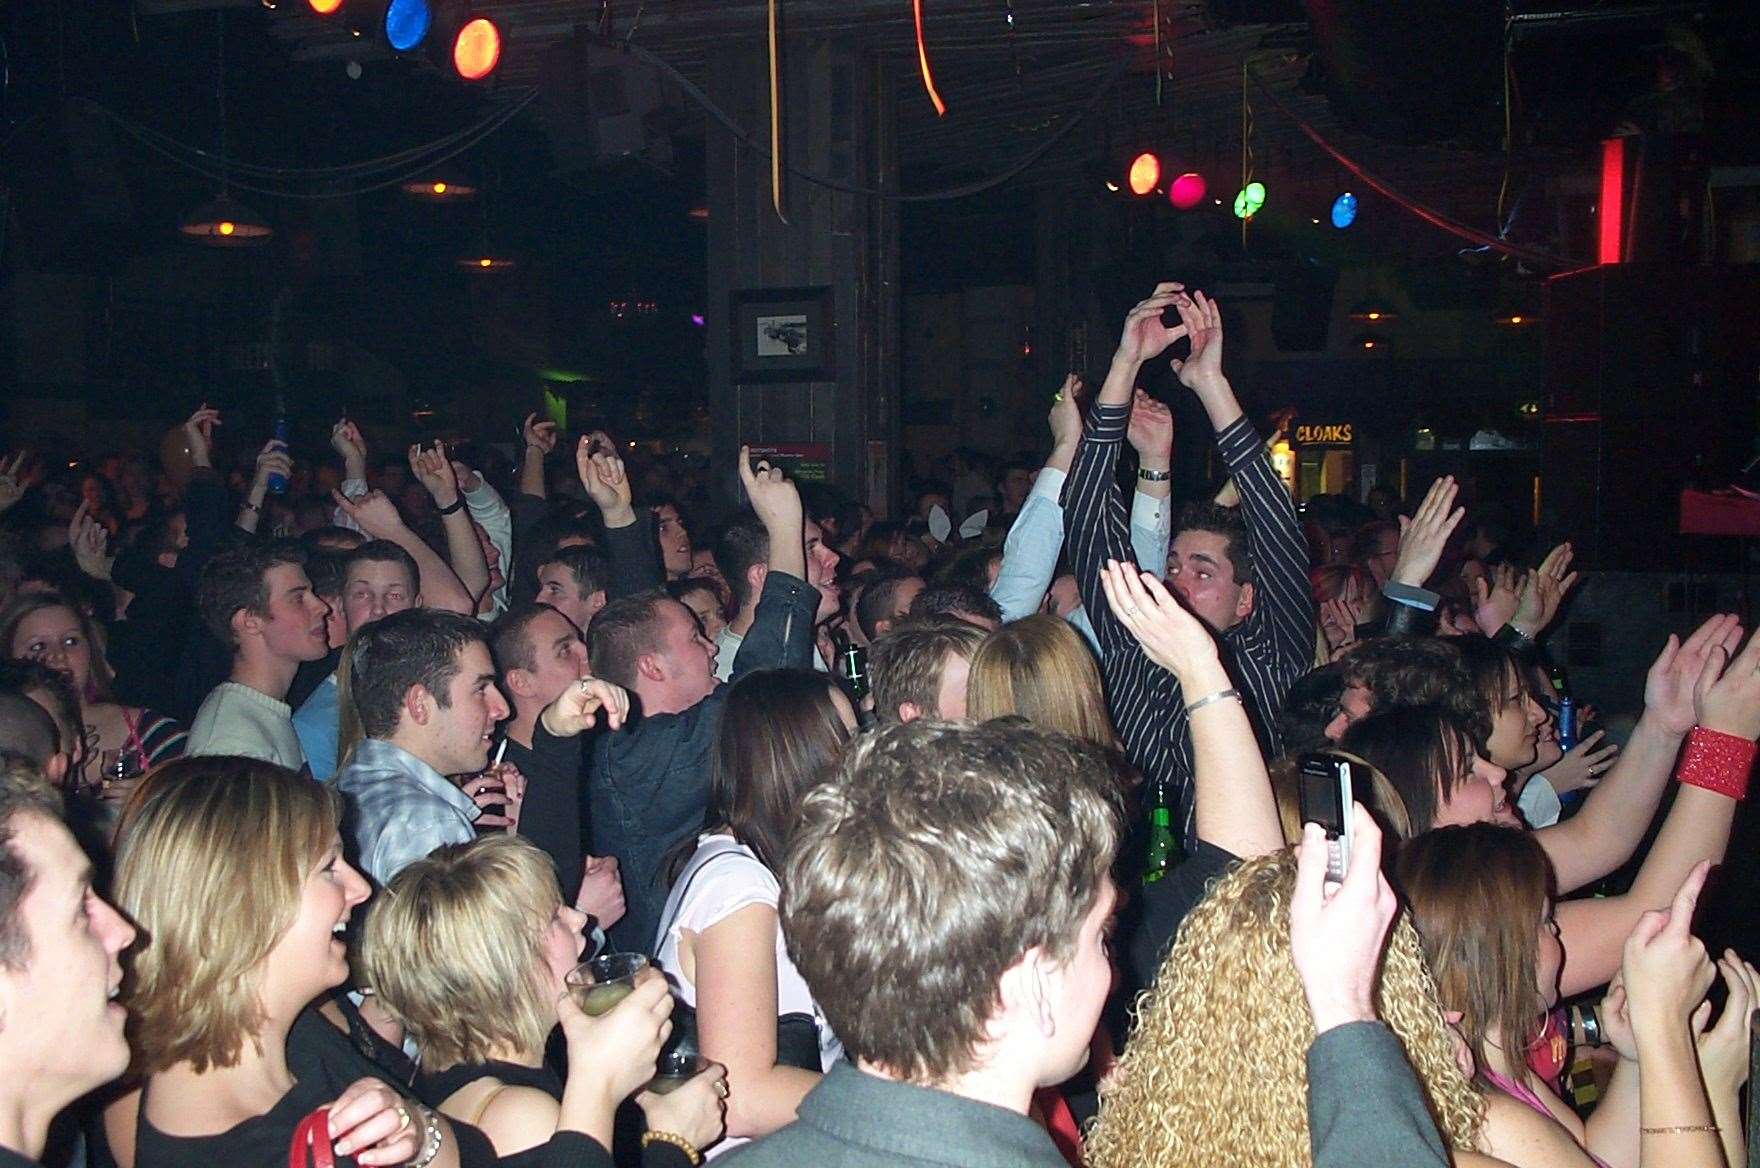 Crowd watching Chesney Hawkes at Jumpin' Jaks in 2004